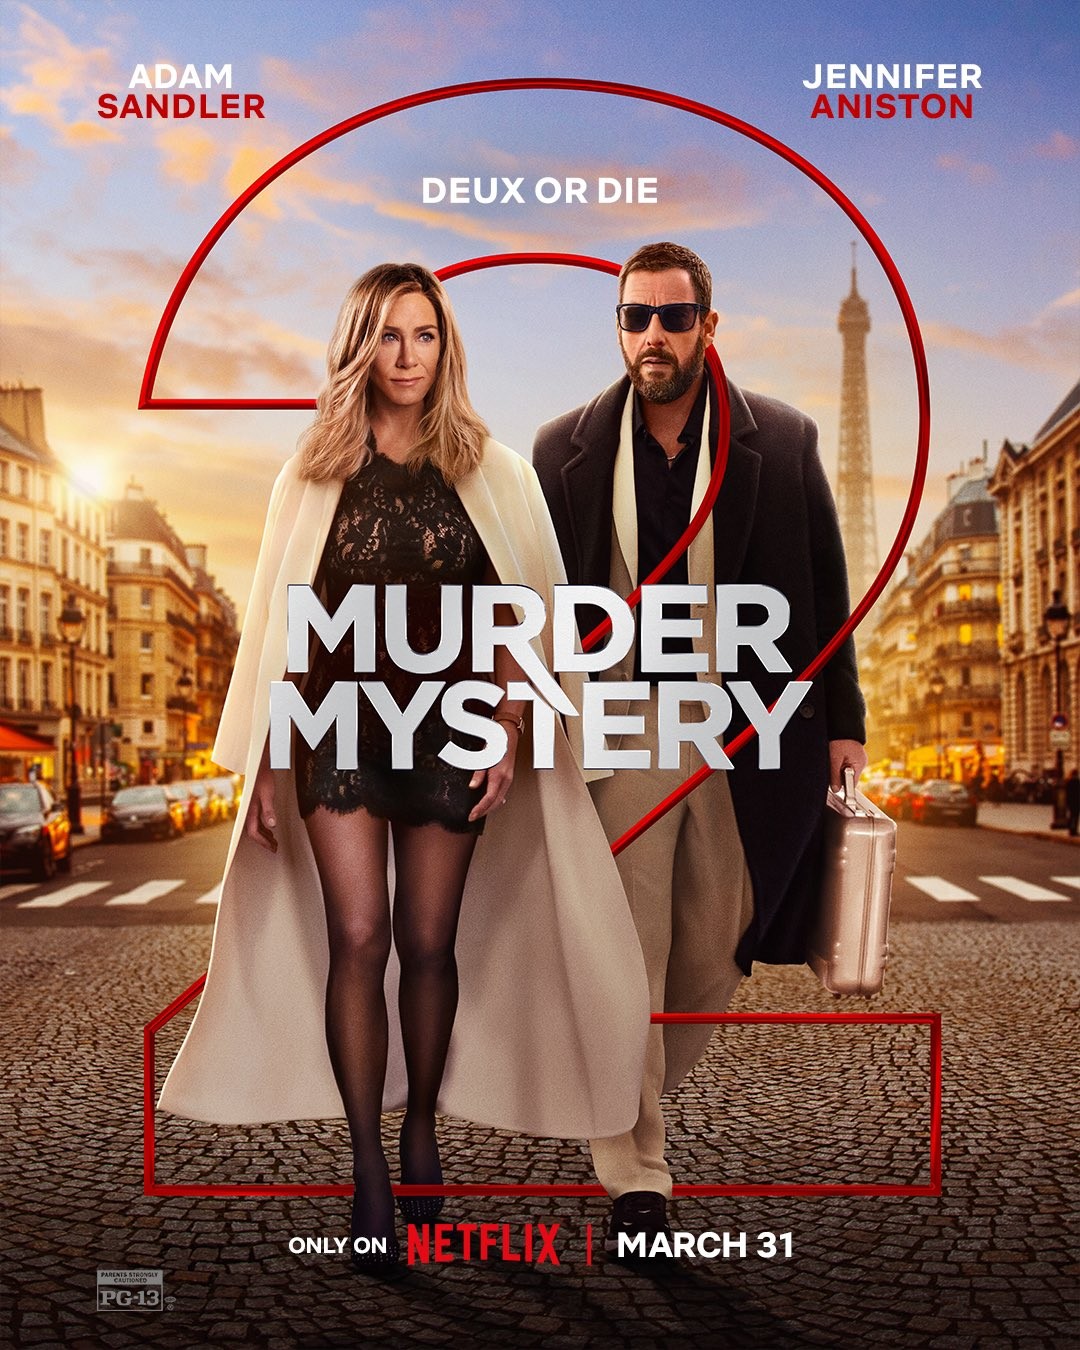 Murder Mystery 2 Review